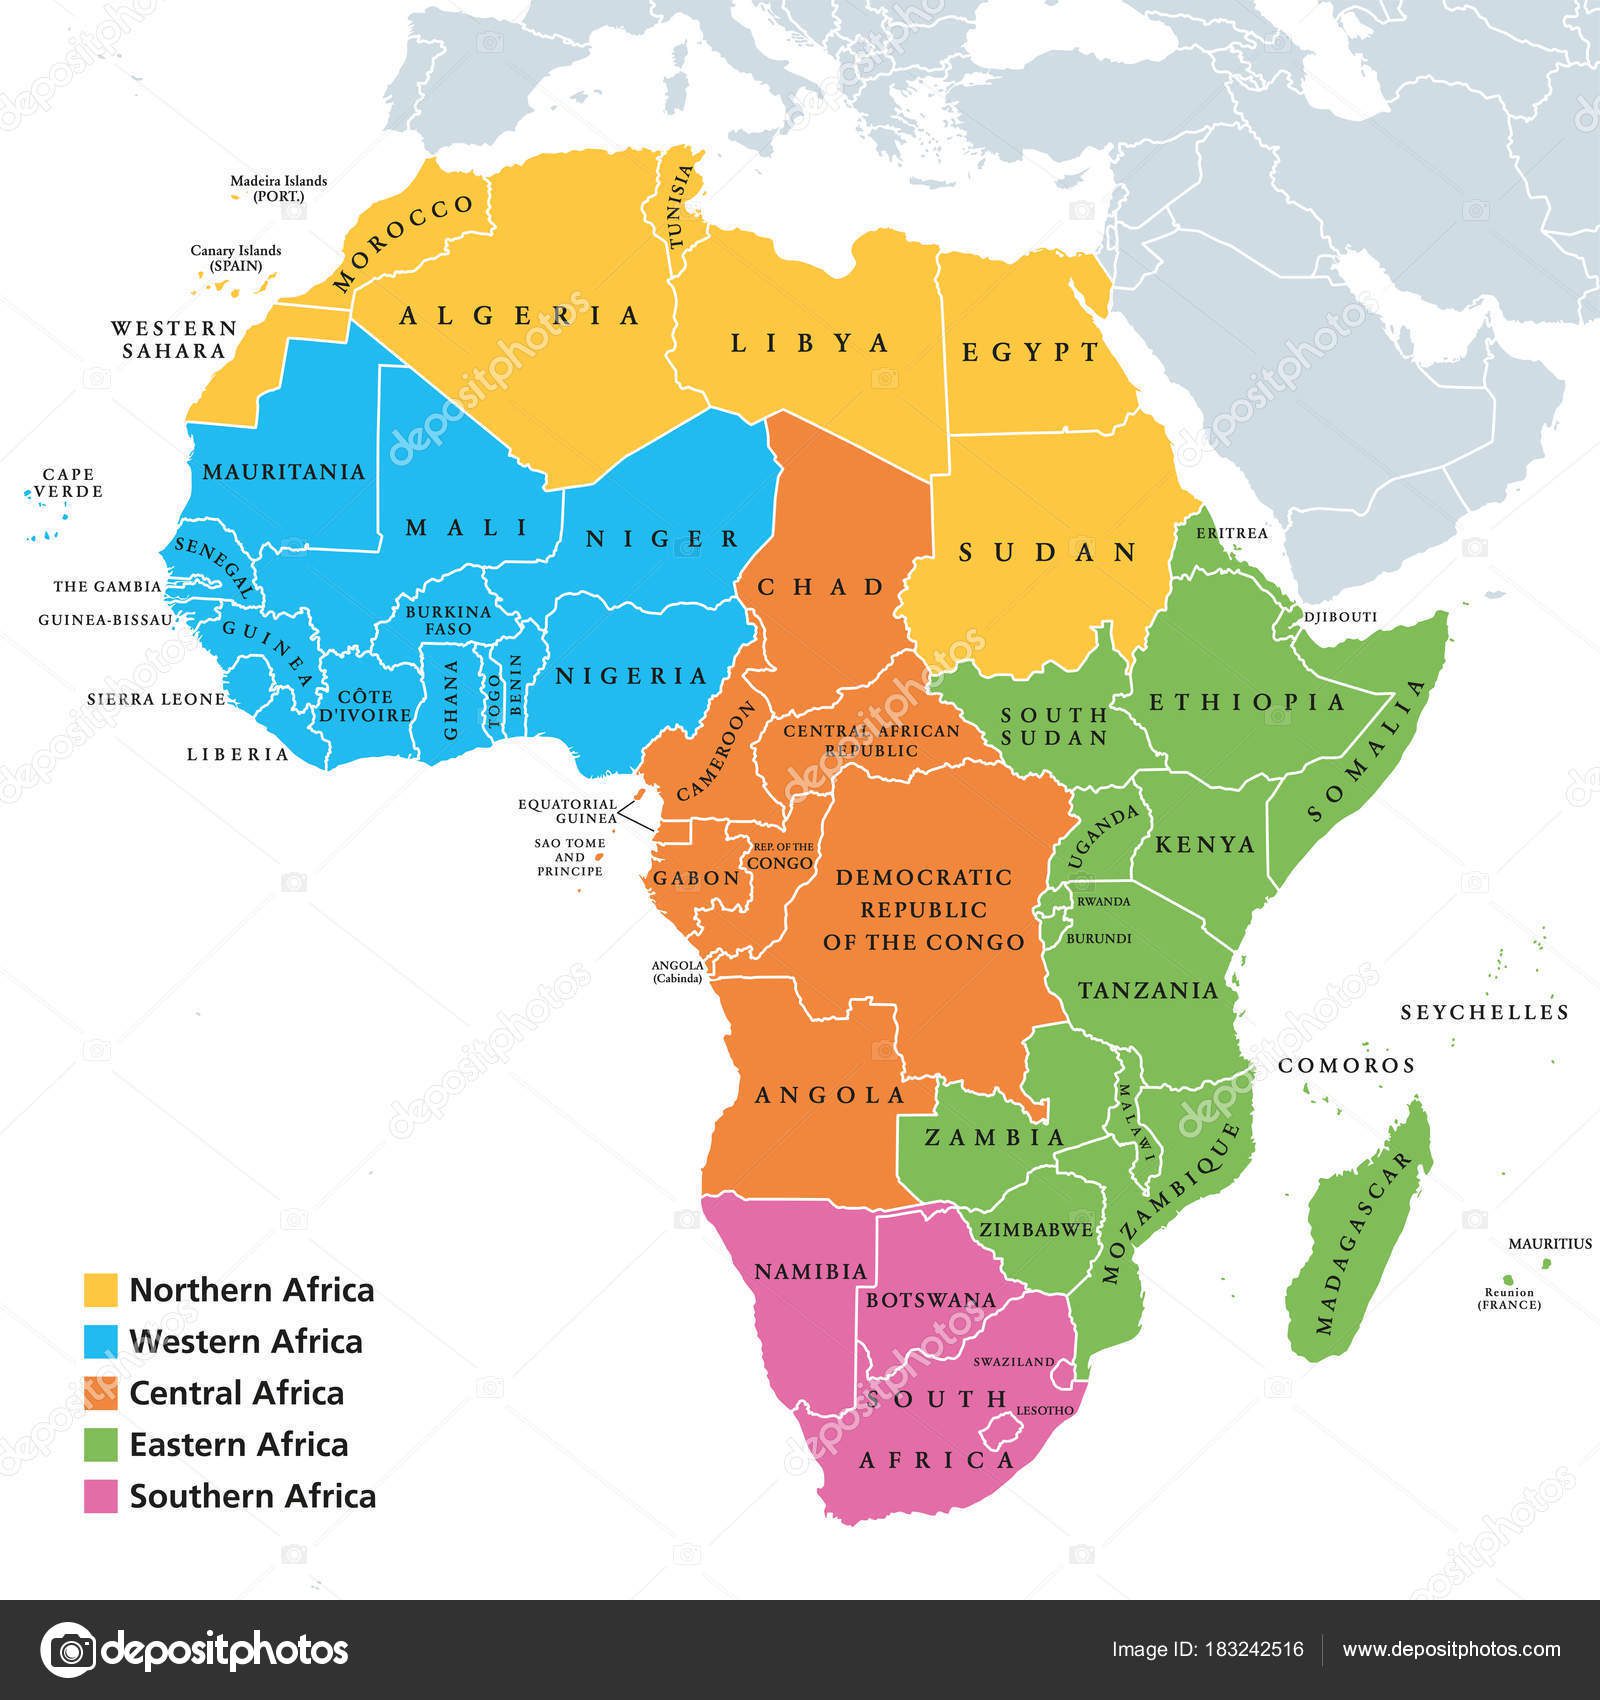 The Africa we want - African Liberty